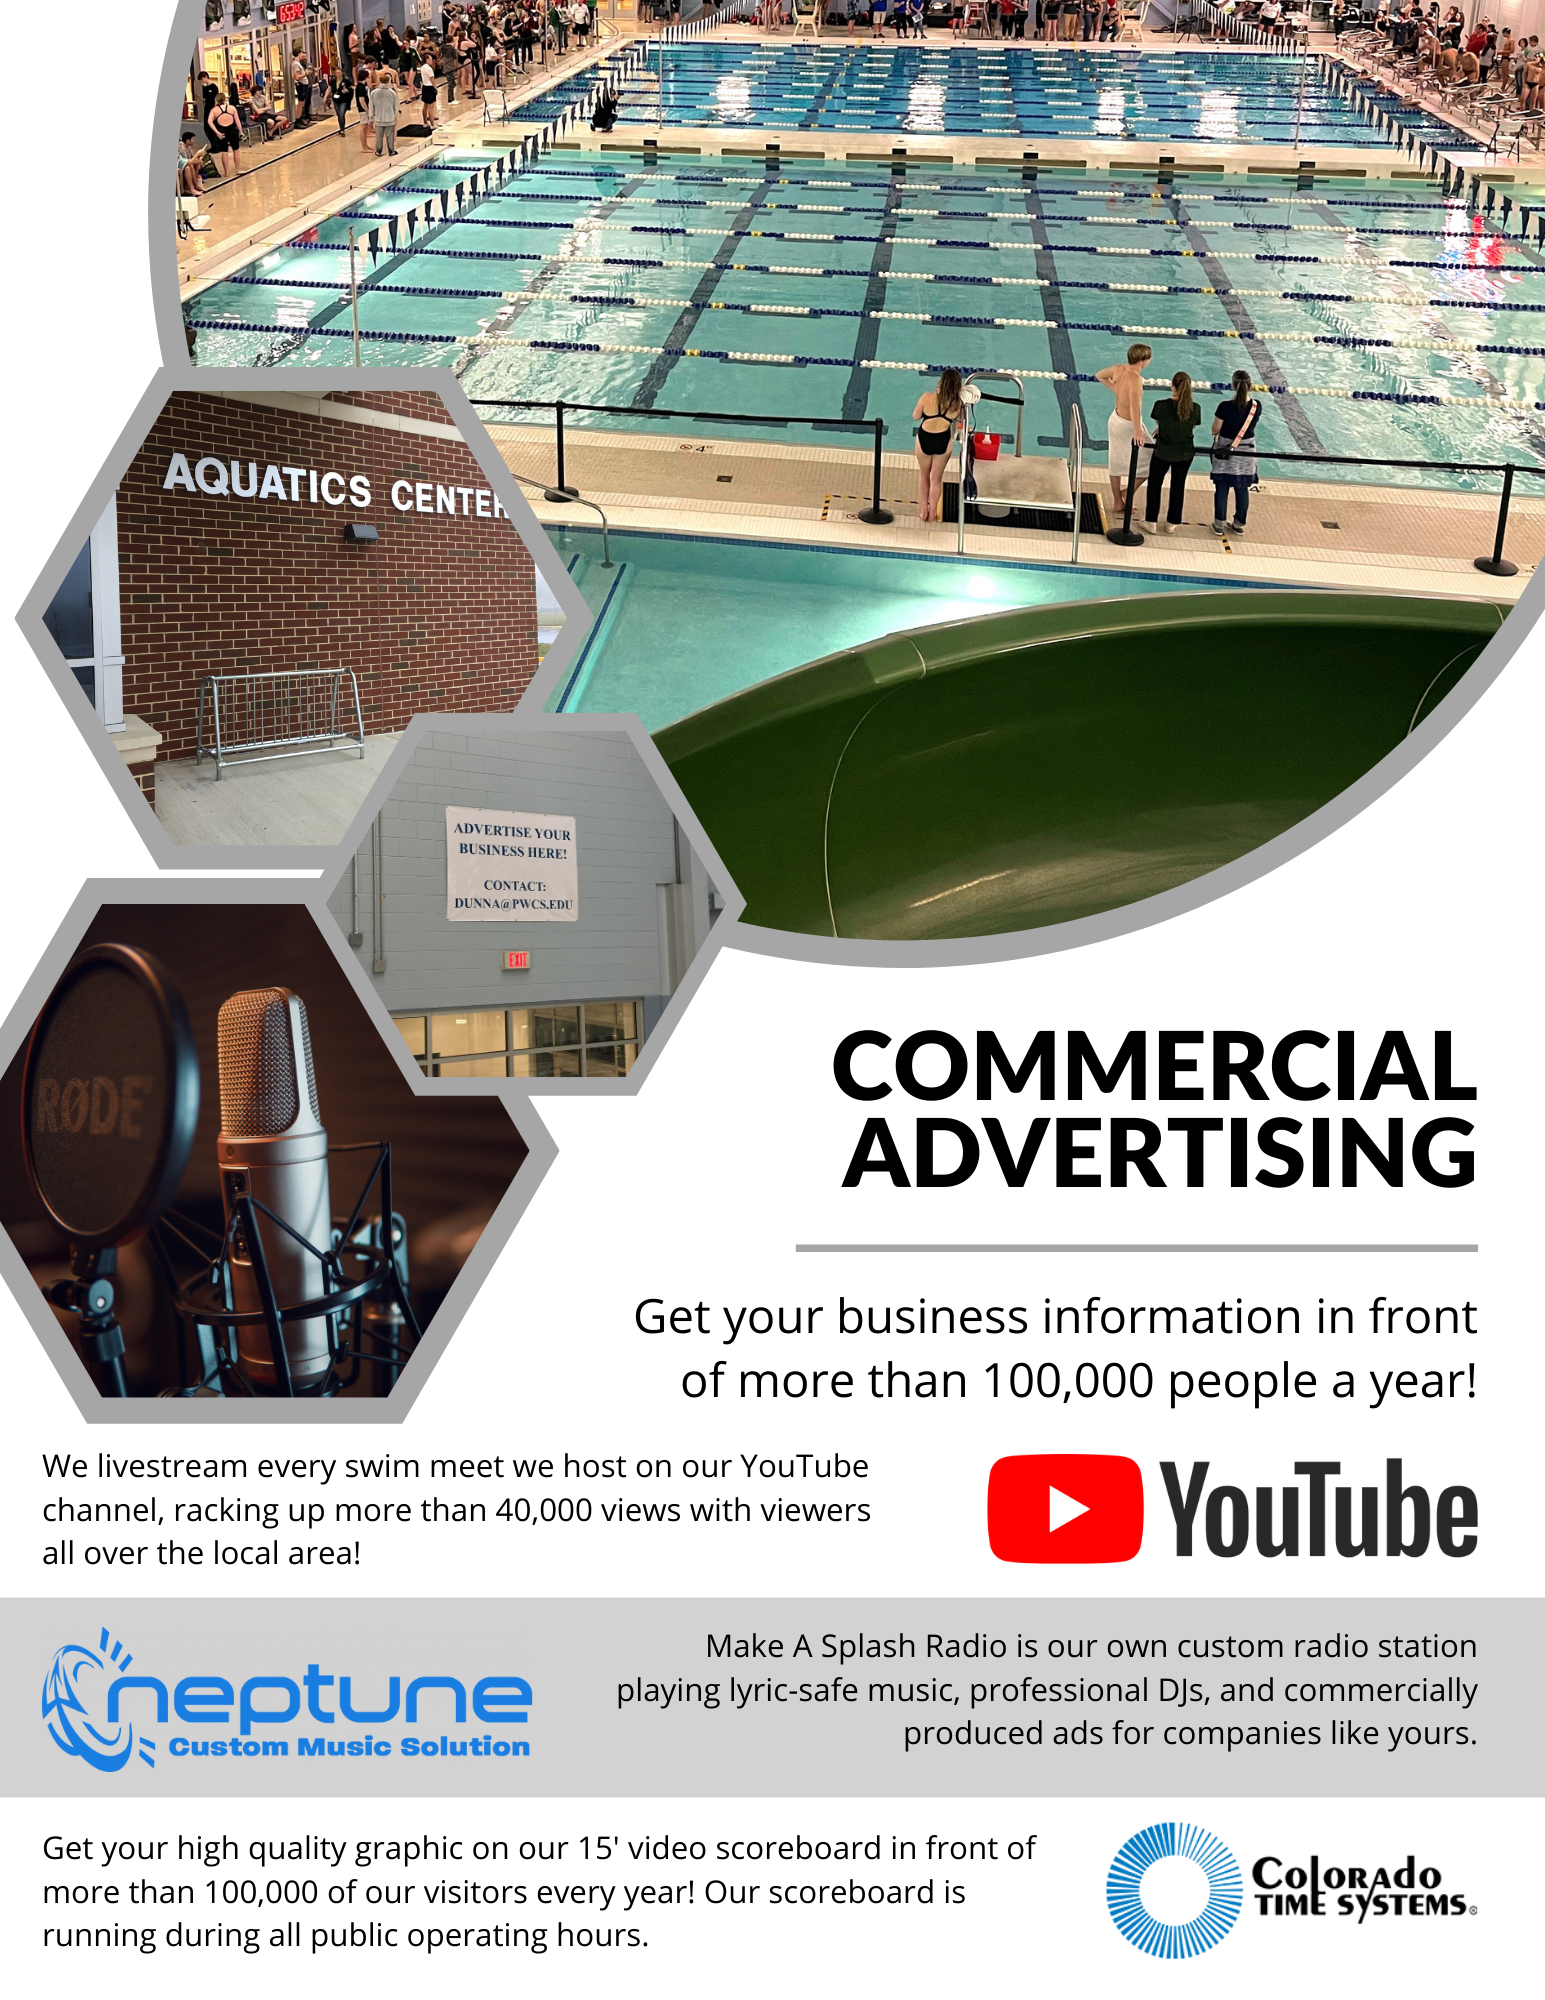 Promotional flyer outlining the advertising options available at the PWCS Aquatics Center